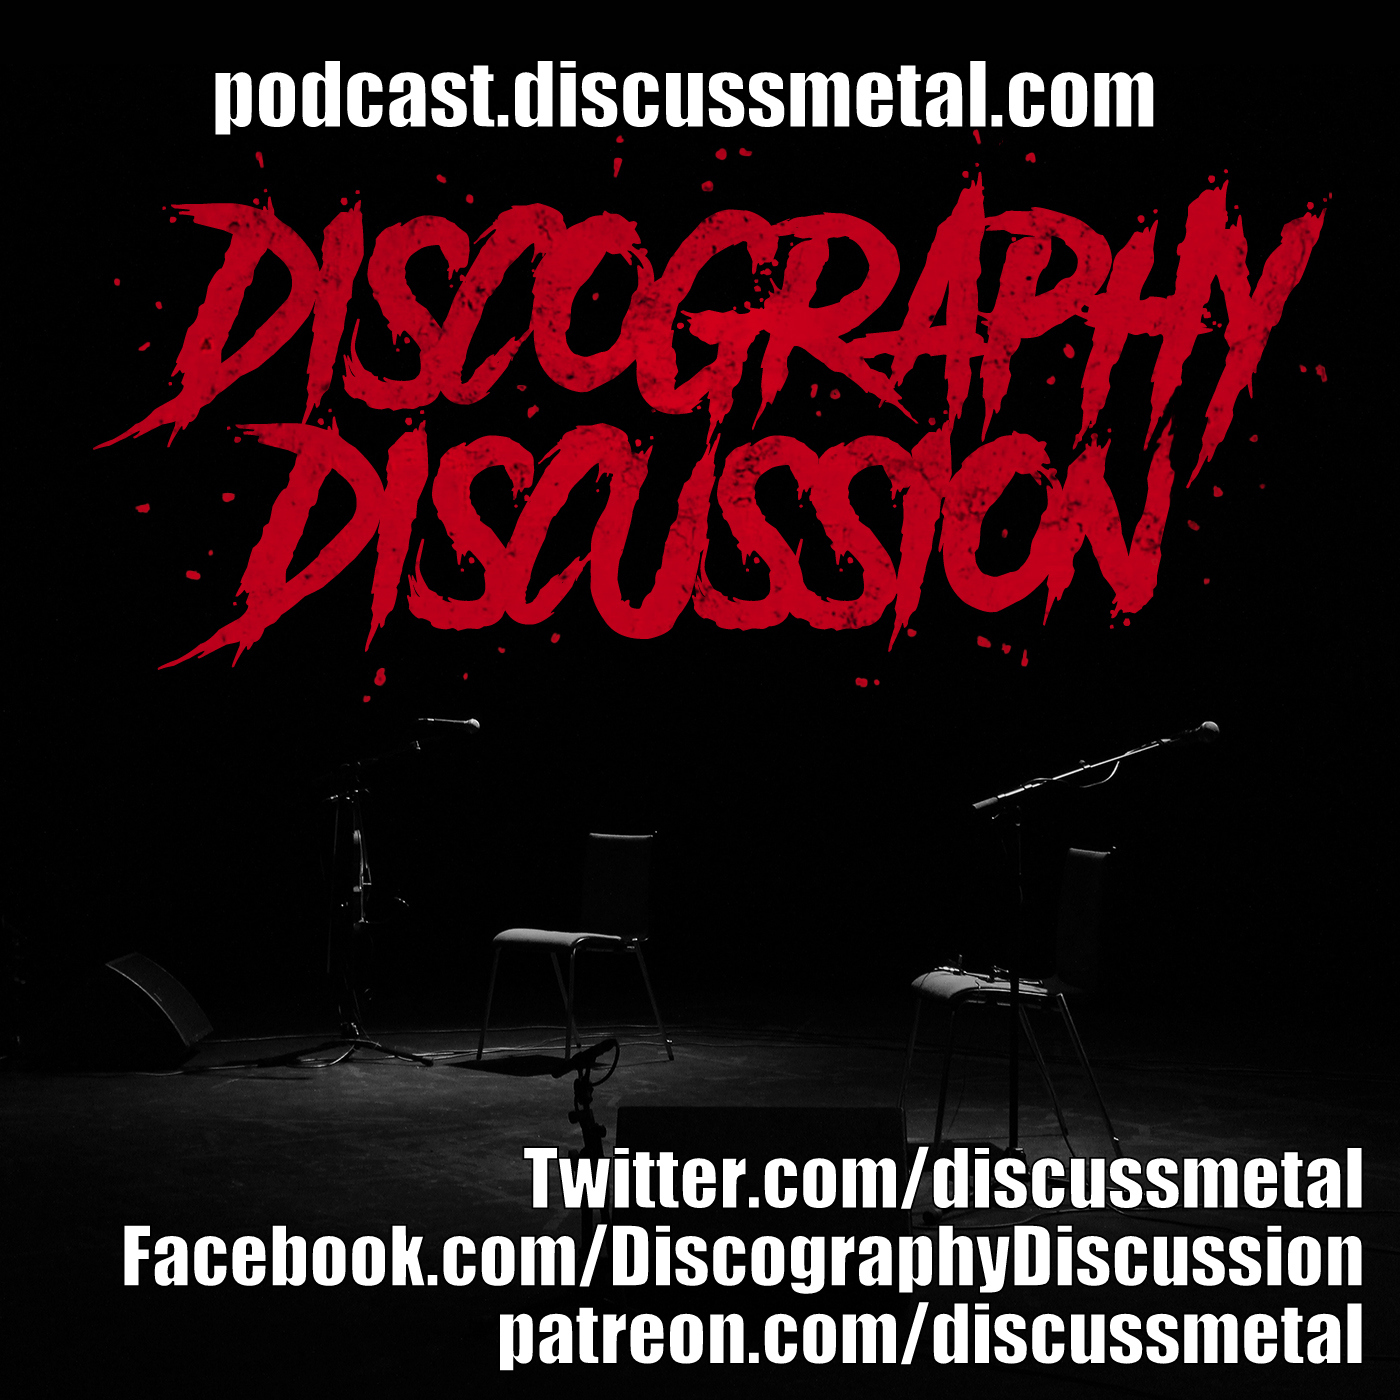 Episode 085: Virgin Black - Discography Discussion